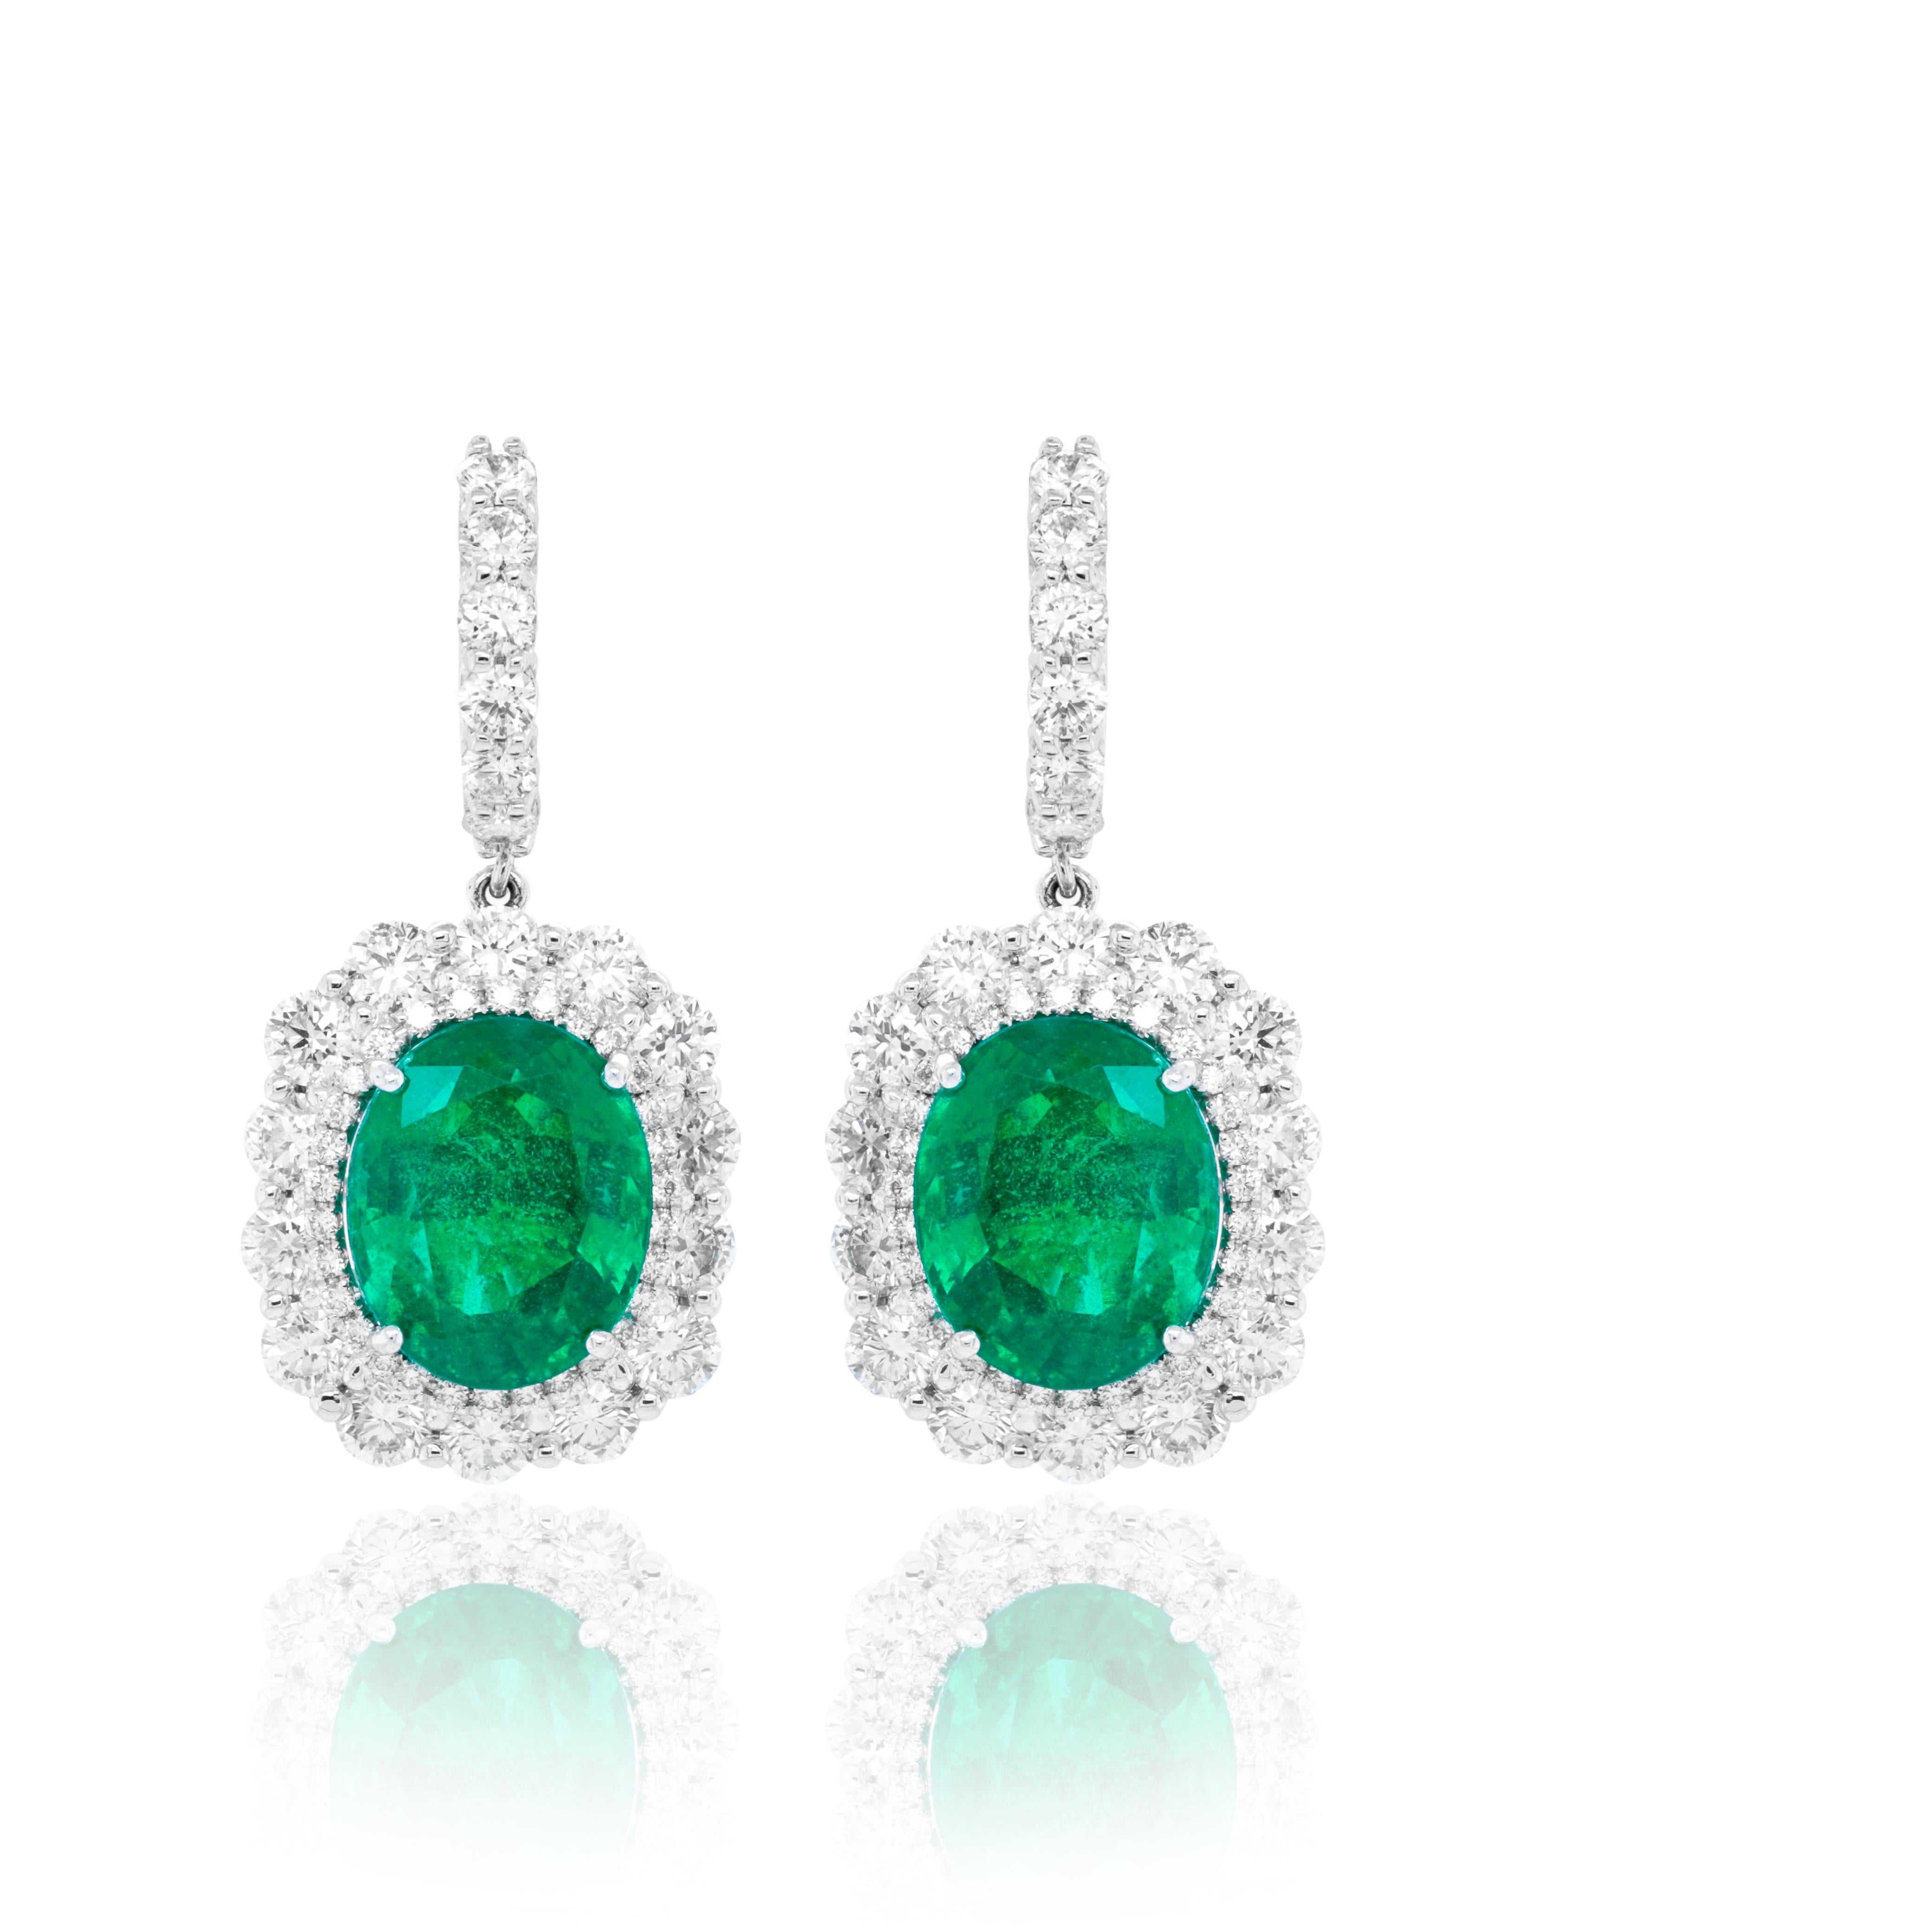 18kt white gold emerald & diamond earrings features 12.98 carats of gia certified oval green emeralds with 6.00 carats of round white diamonds set all the way around
